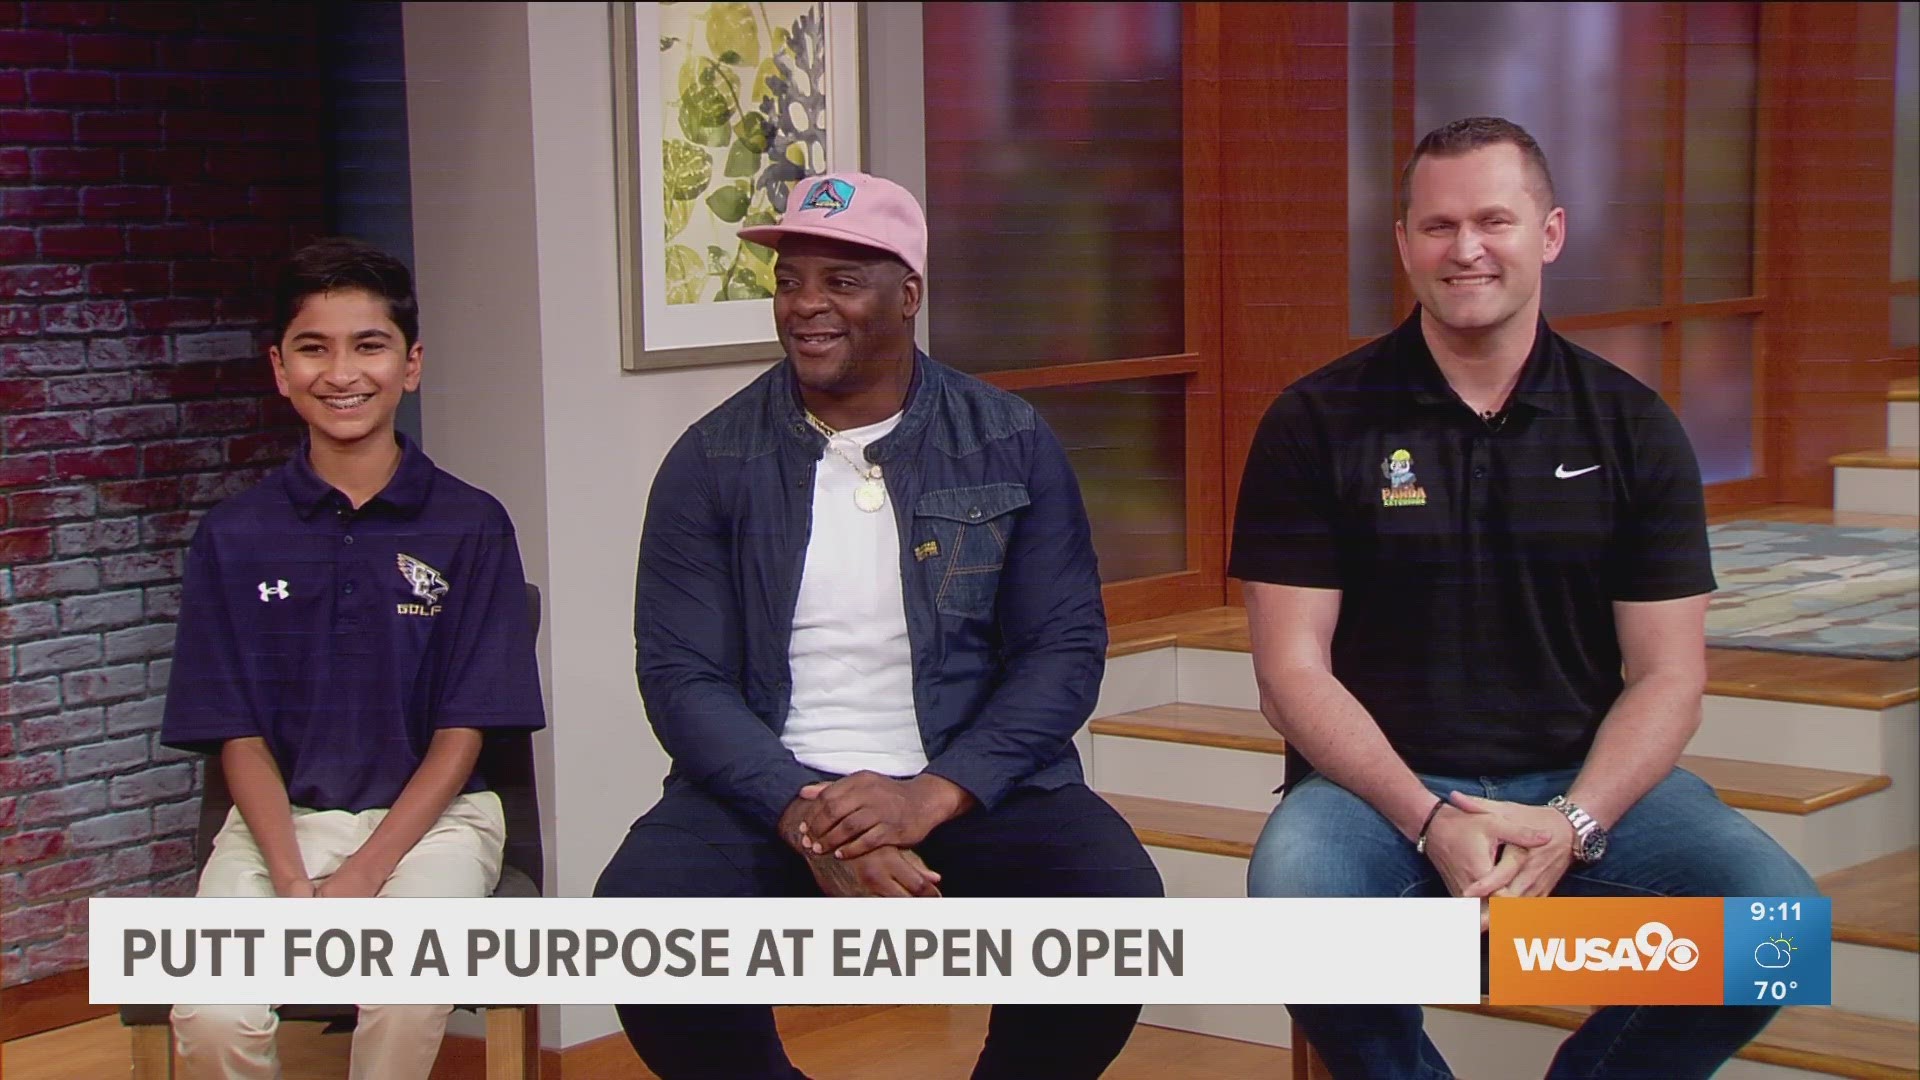 Local charity golf tournament featuring former professional NFL players including Clinton Portis to raise money for the Leukemia & Lymphoma Society and So Kids SOAR.